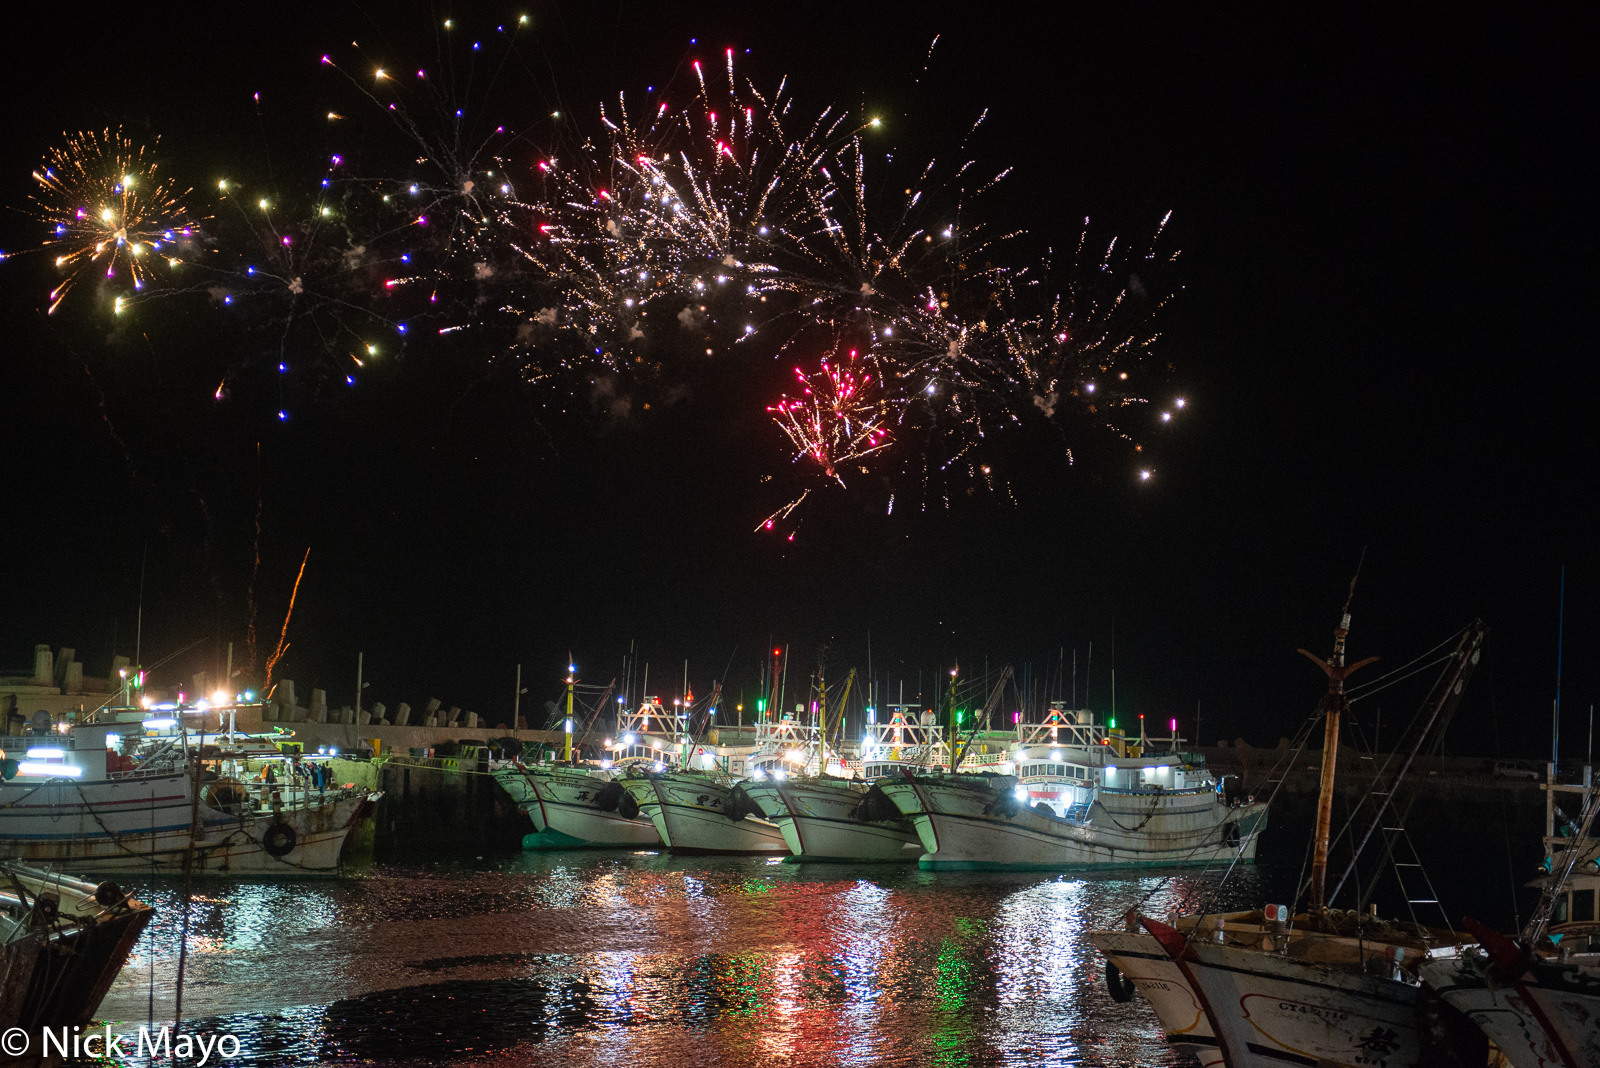 Festival fireworks bursting over fishing boats in Wai'an harbour.